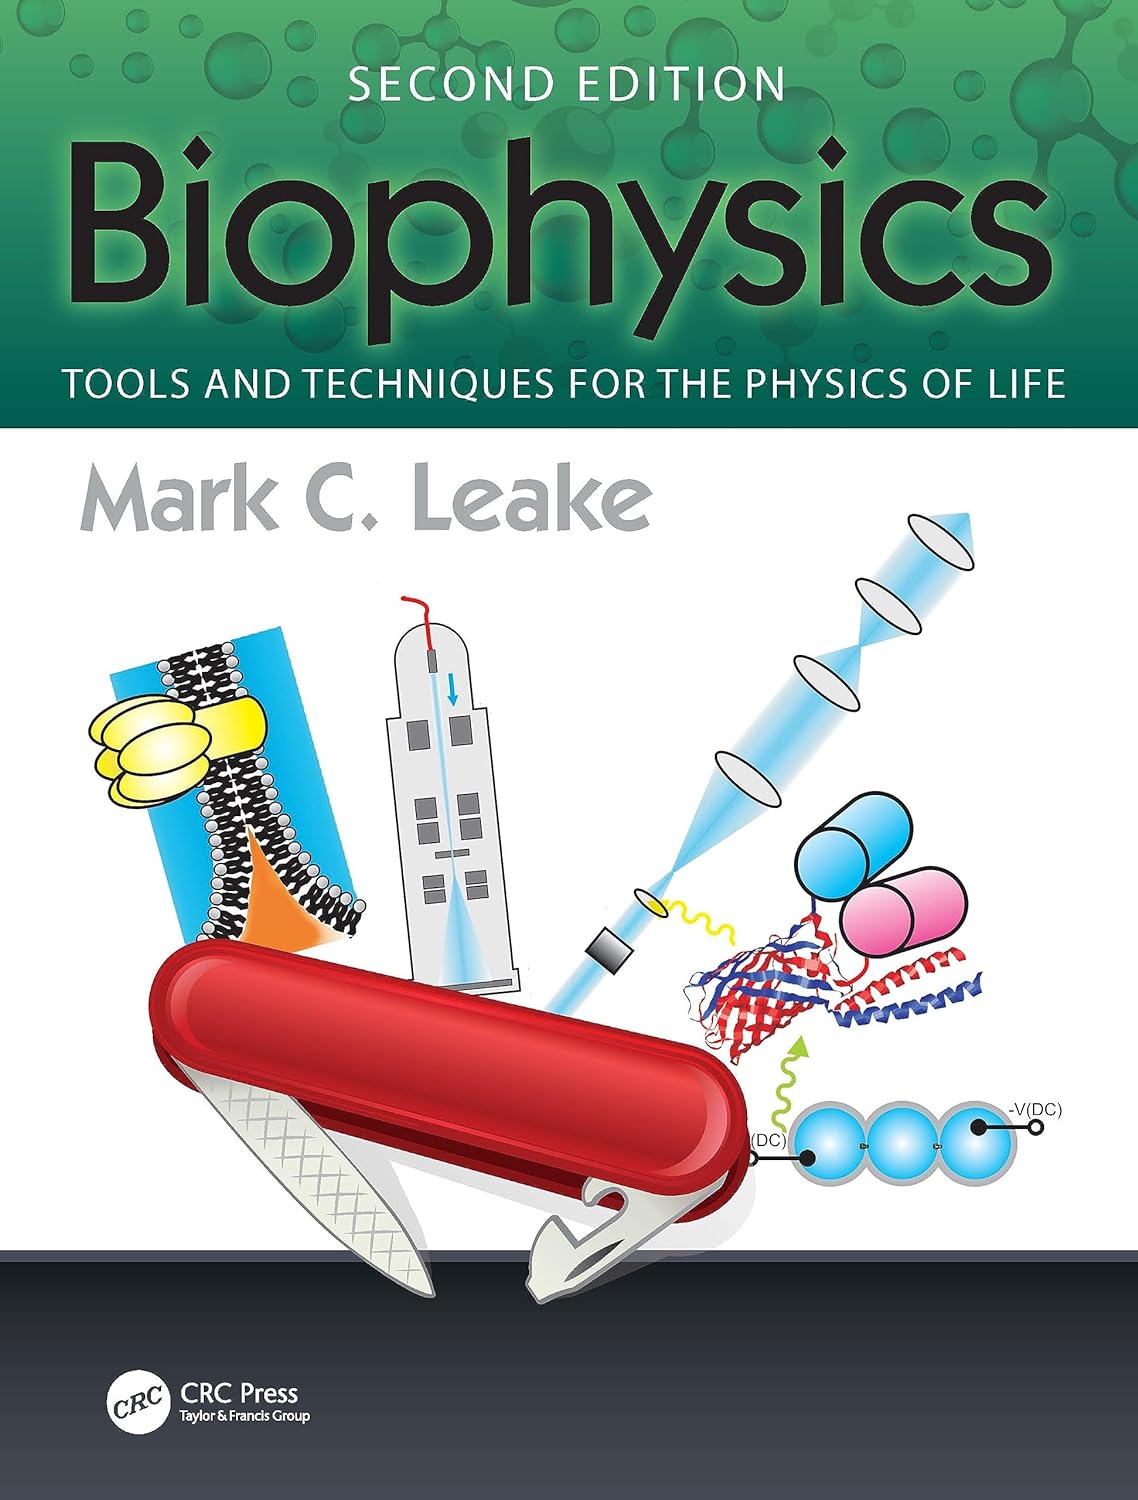 (EBook PDF)Biophysics: Tools and Techniques for the Physics of Life, 2nd Edition by Mark C. Leake